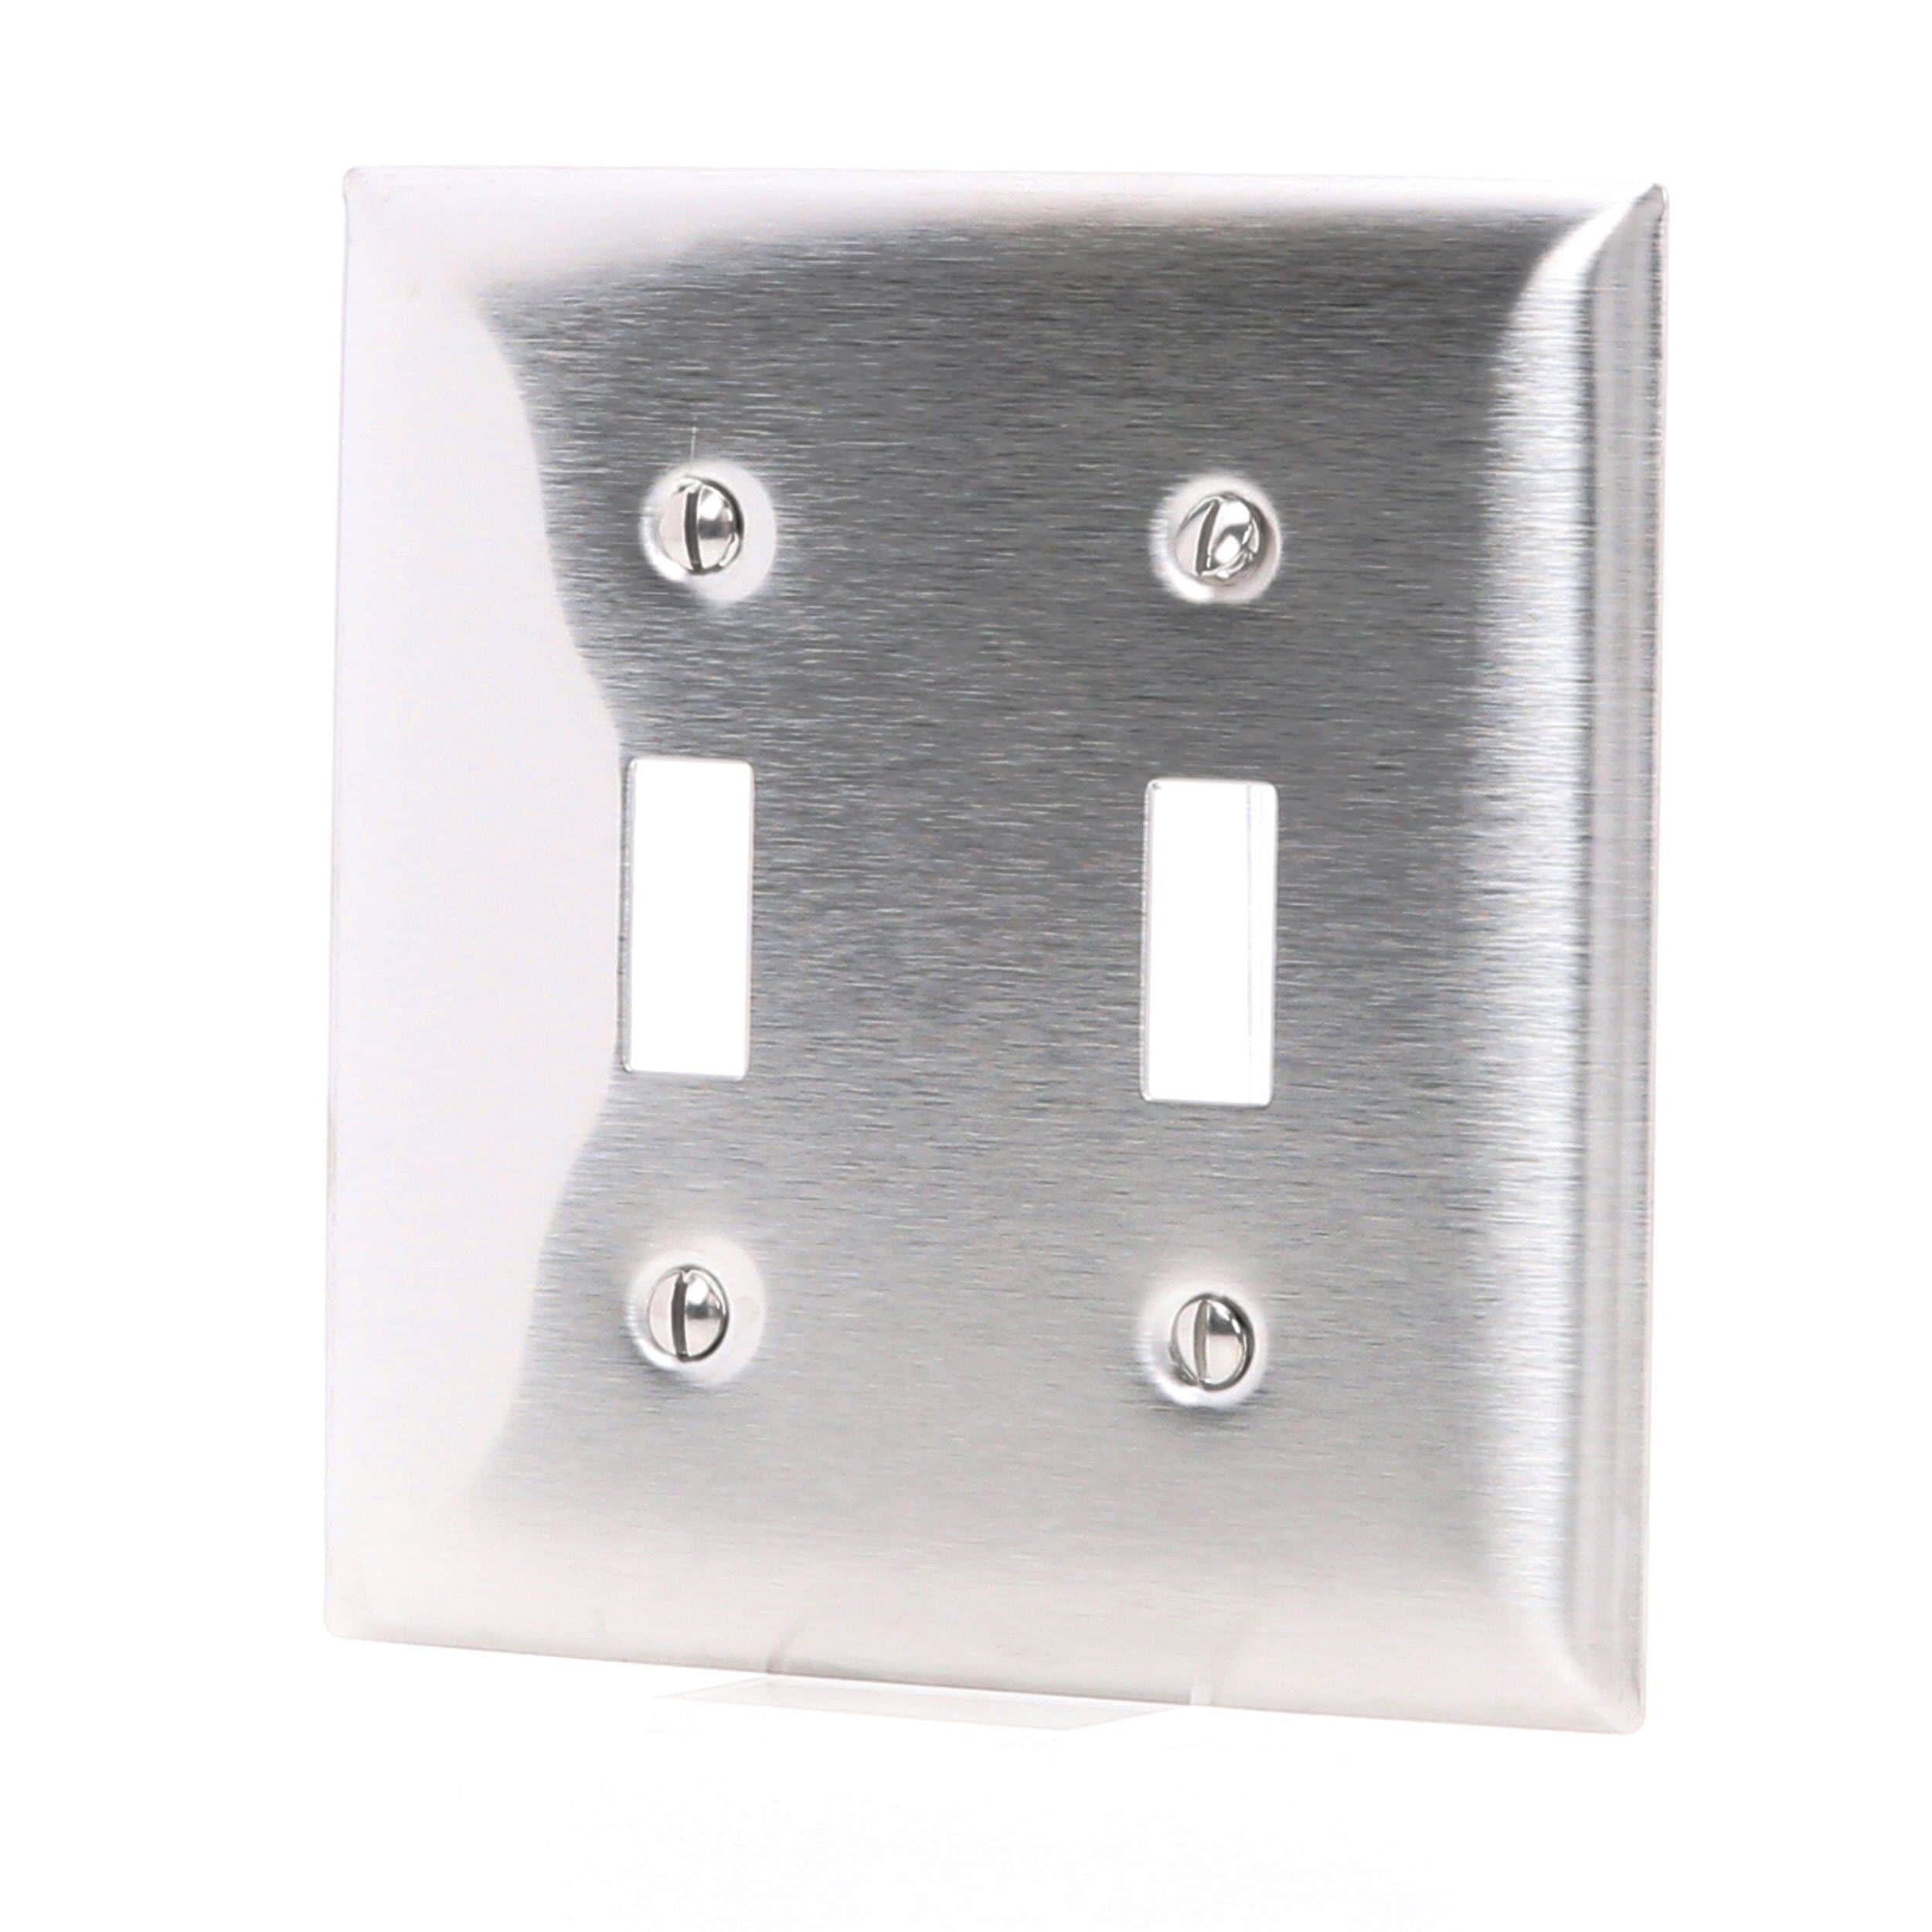 SS2 Hubbell Wallplate 2-gang Switch Stainless Steel for sale online 